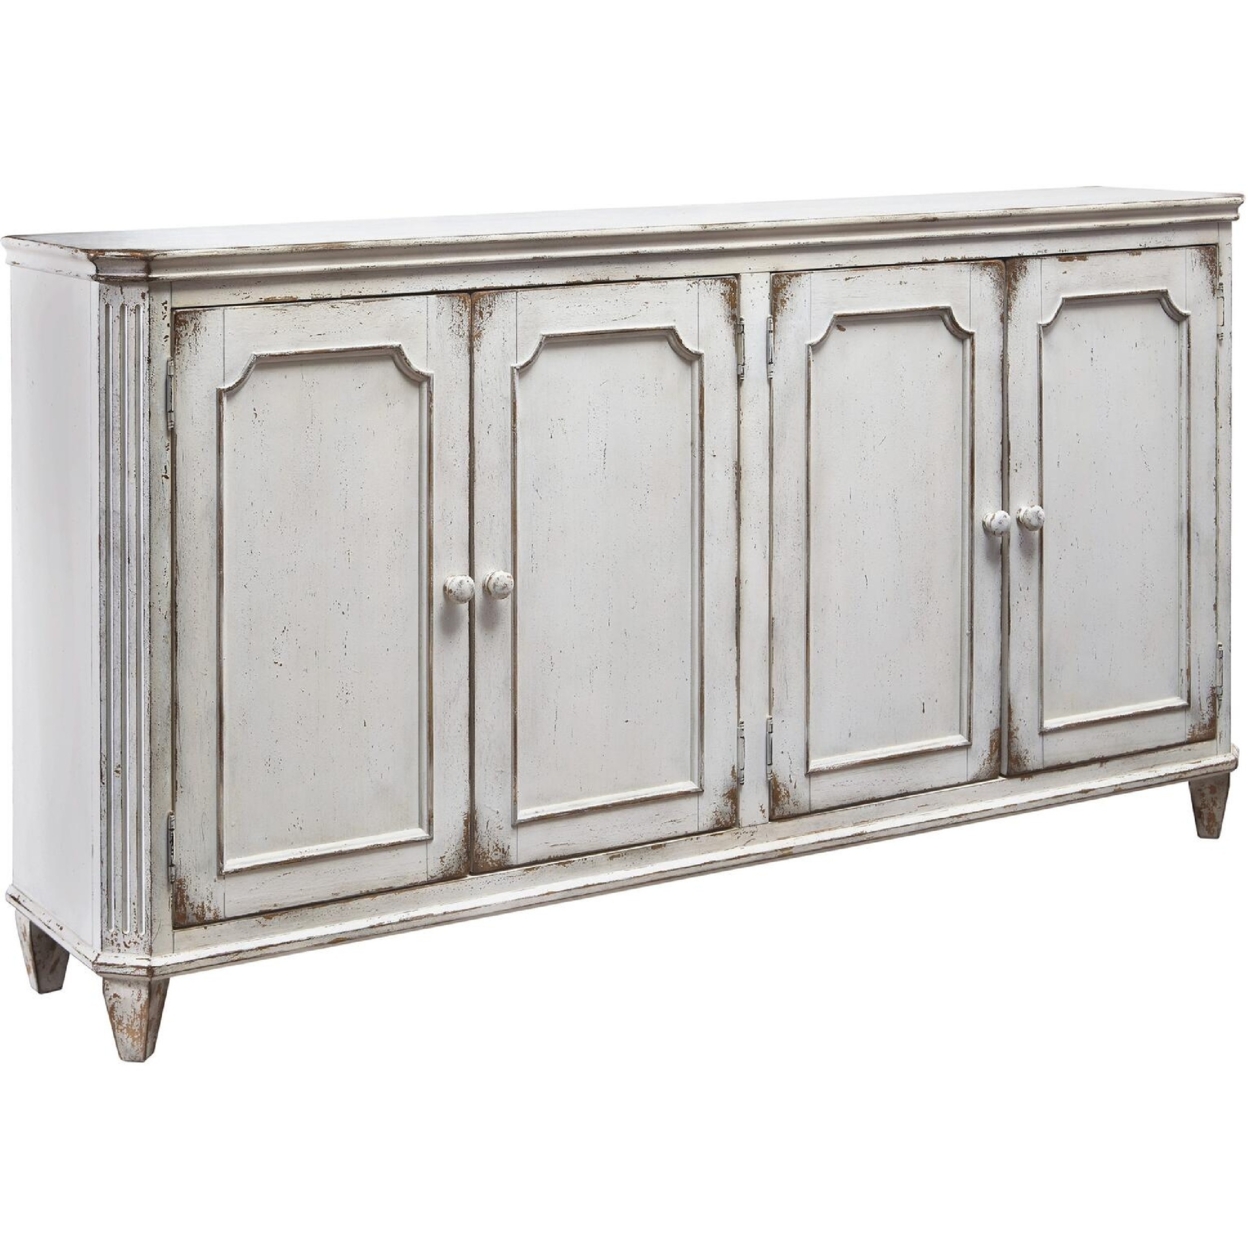 4 Panel Door Cabinet With Fluted Detail, Antique White- Saltoro Sherpi